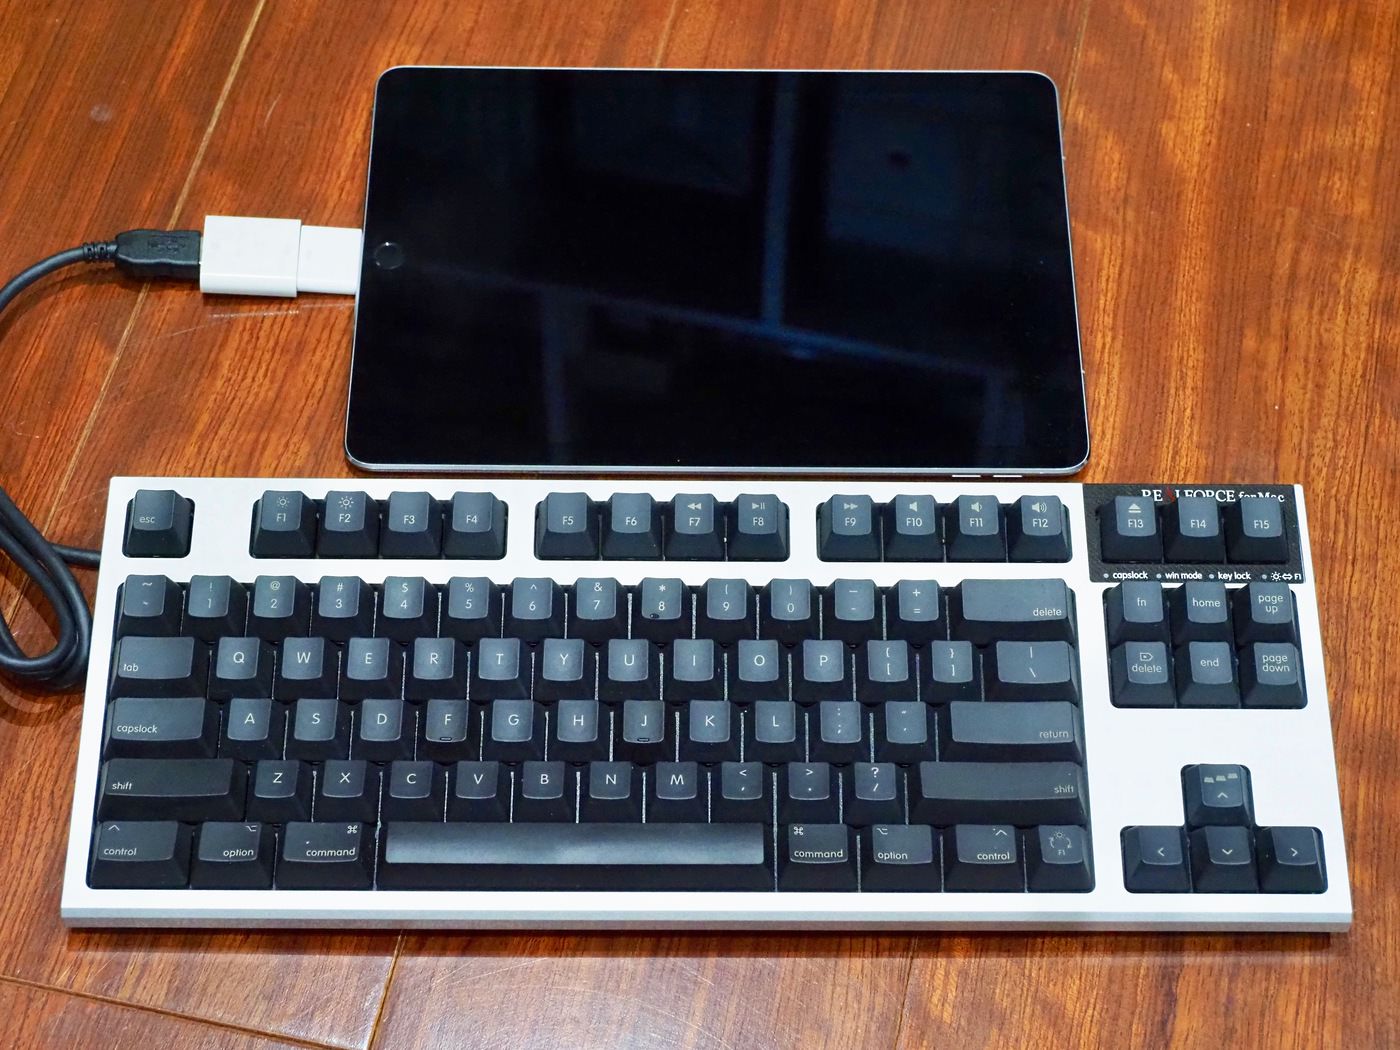 Realforce tkl for mac pfu limited edition review 00023